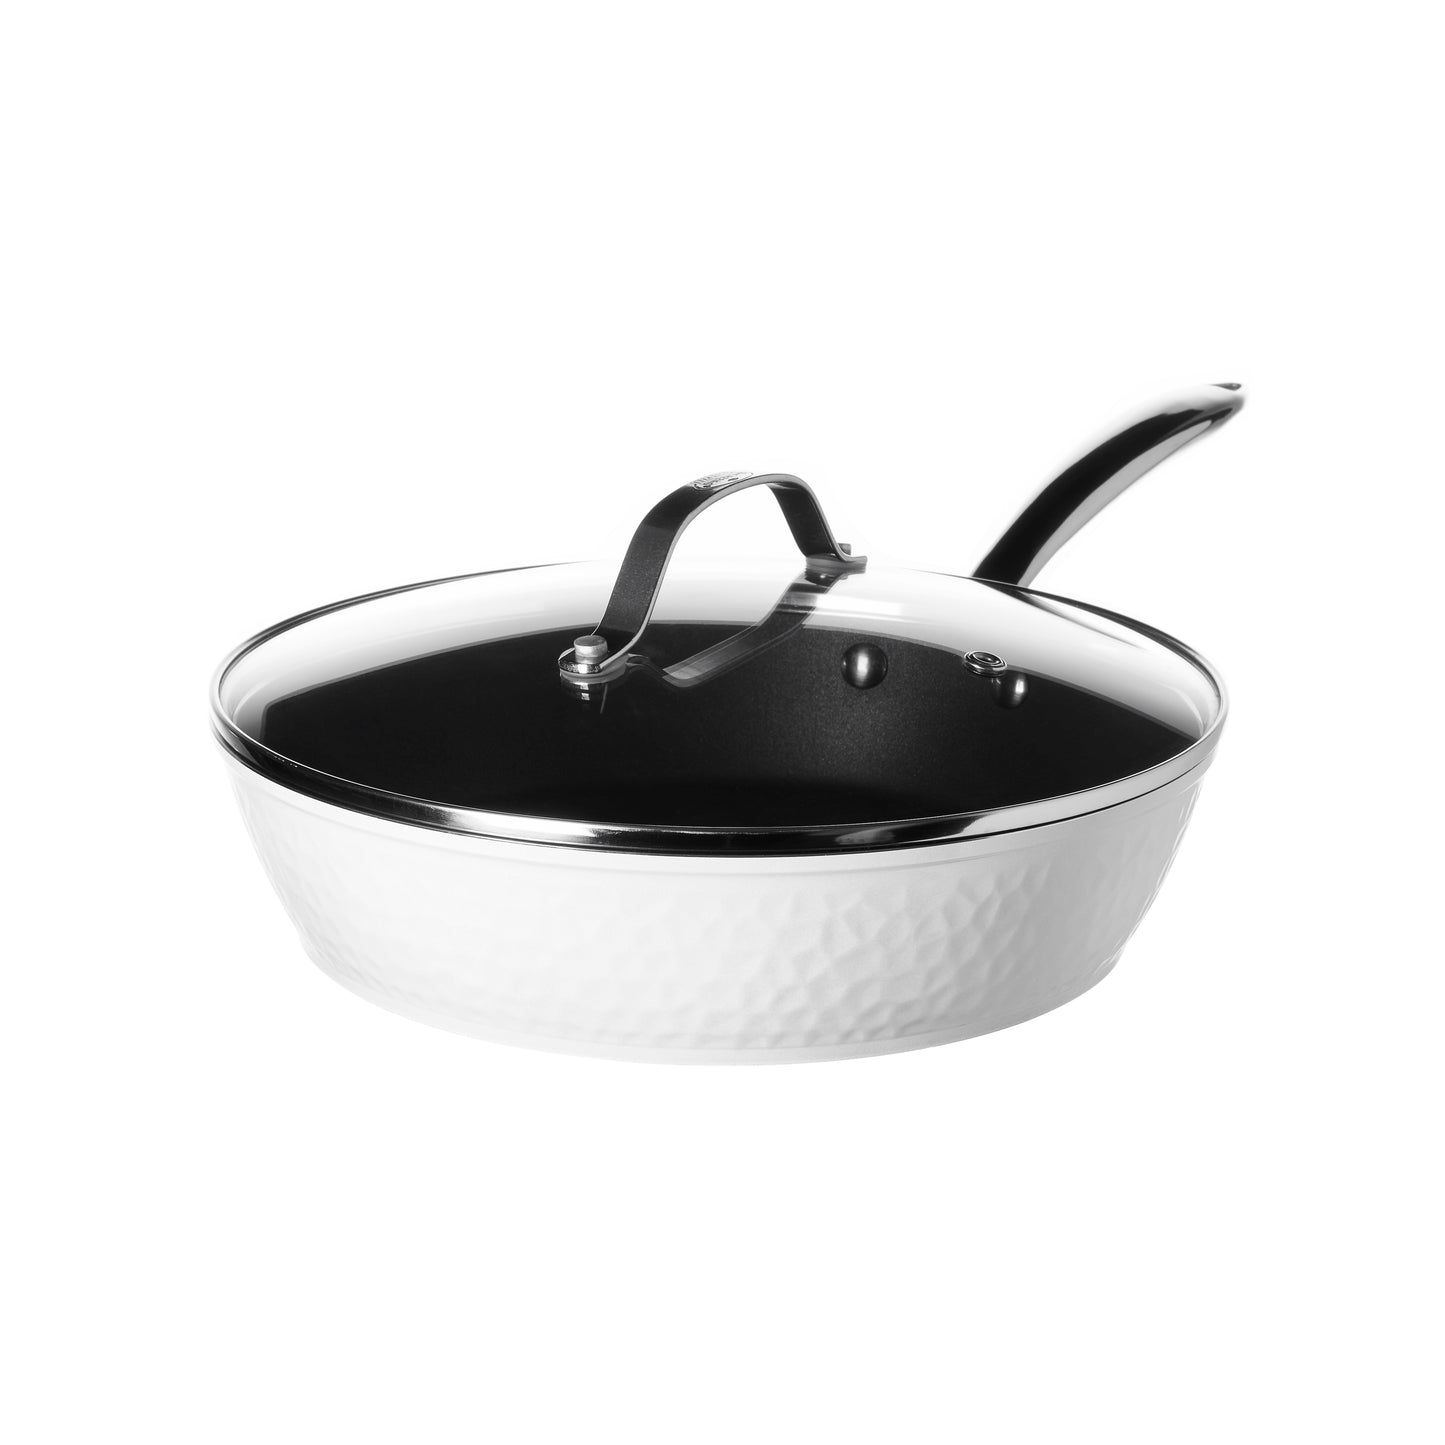 OSQI 14” Frying Pan with Lid, Large Non stick Frying Pan for